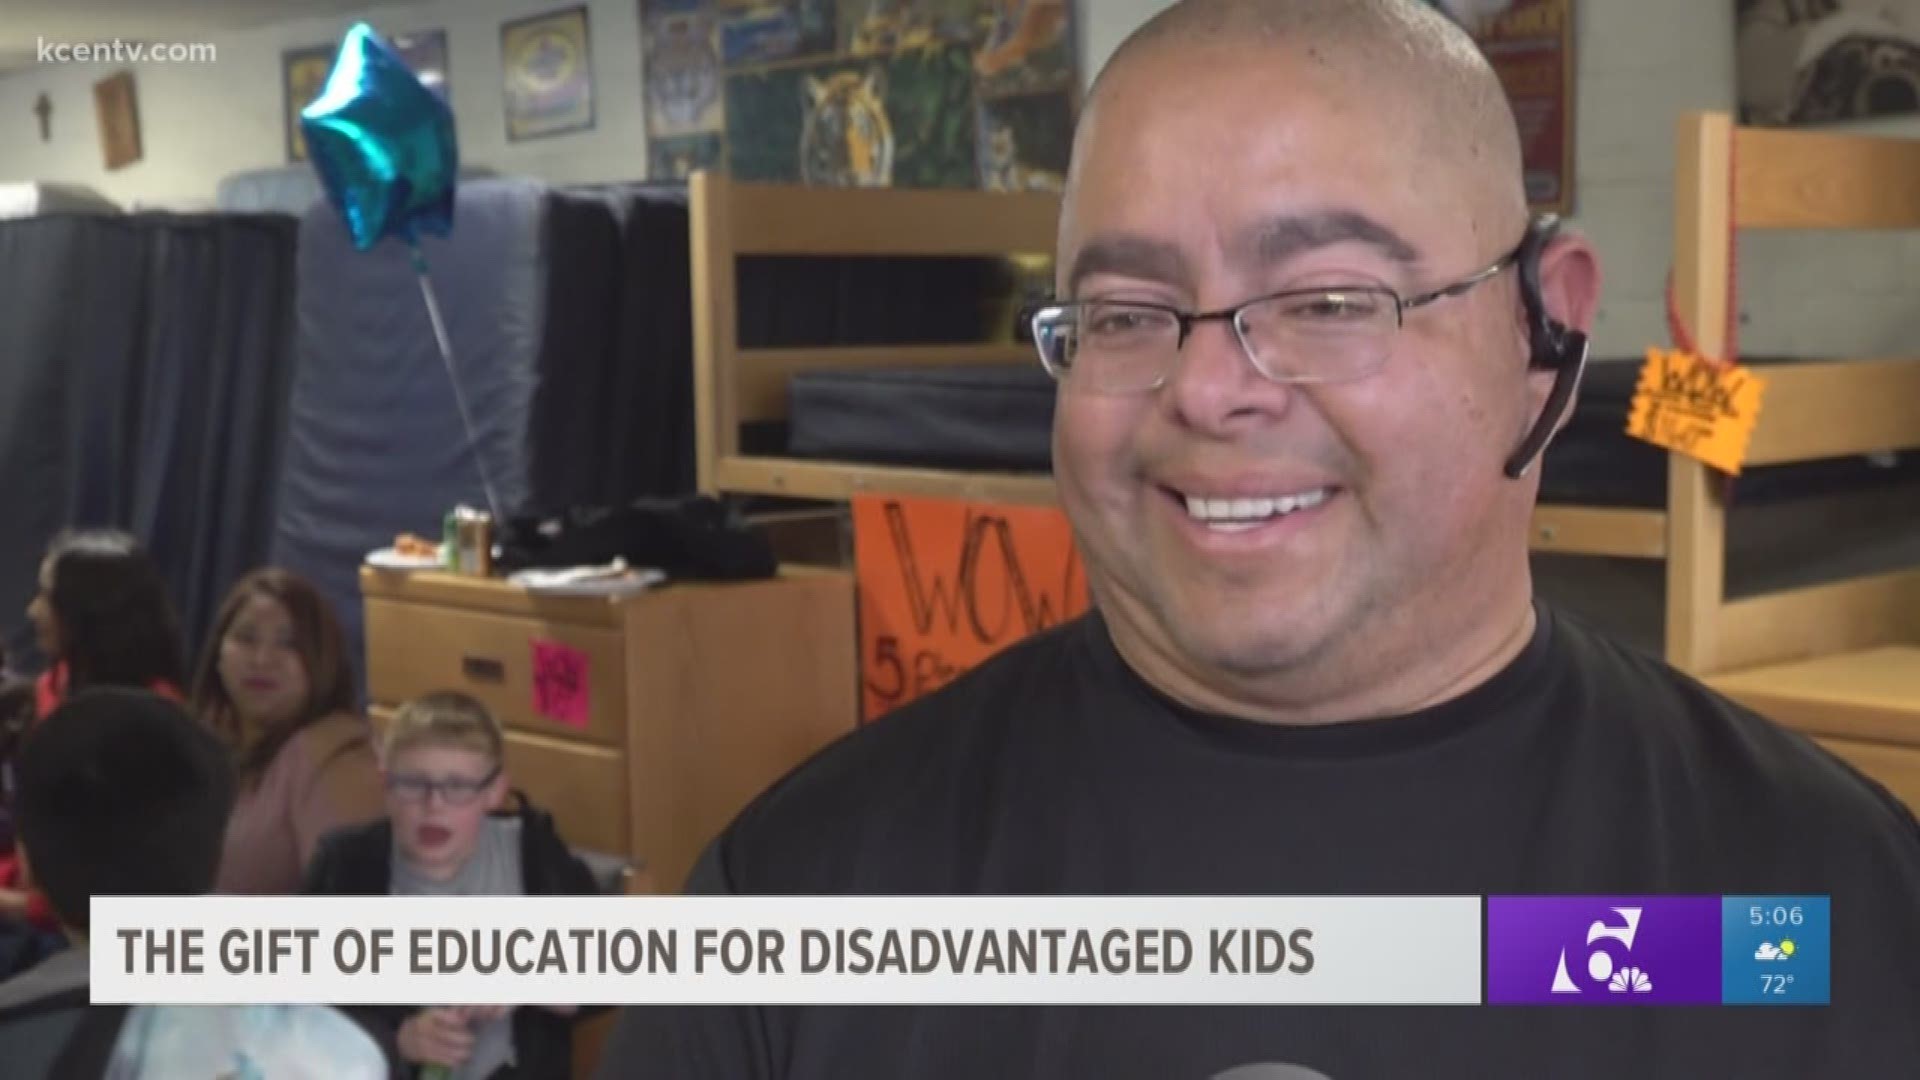 A Killeen man donates desks to underprivileged kids so they can study comfortably at home.